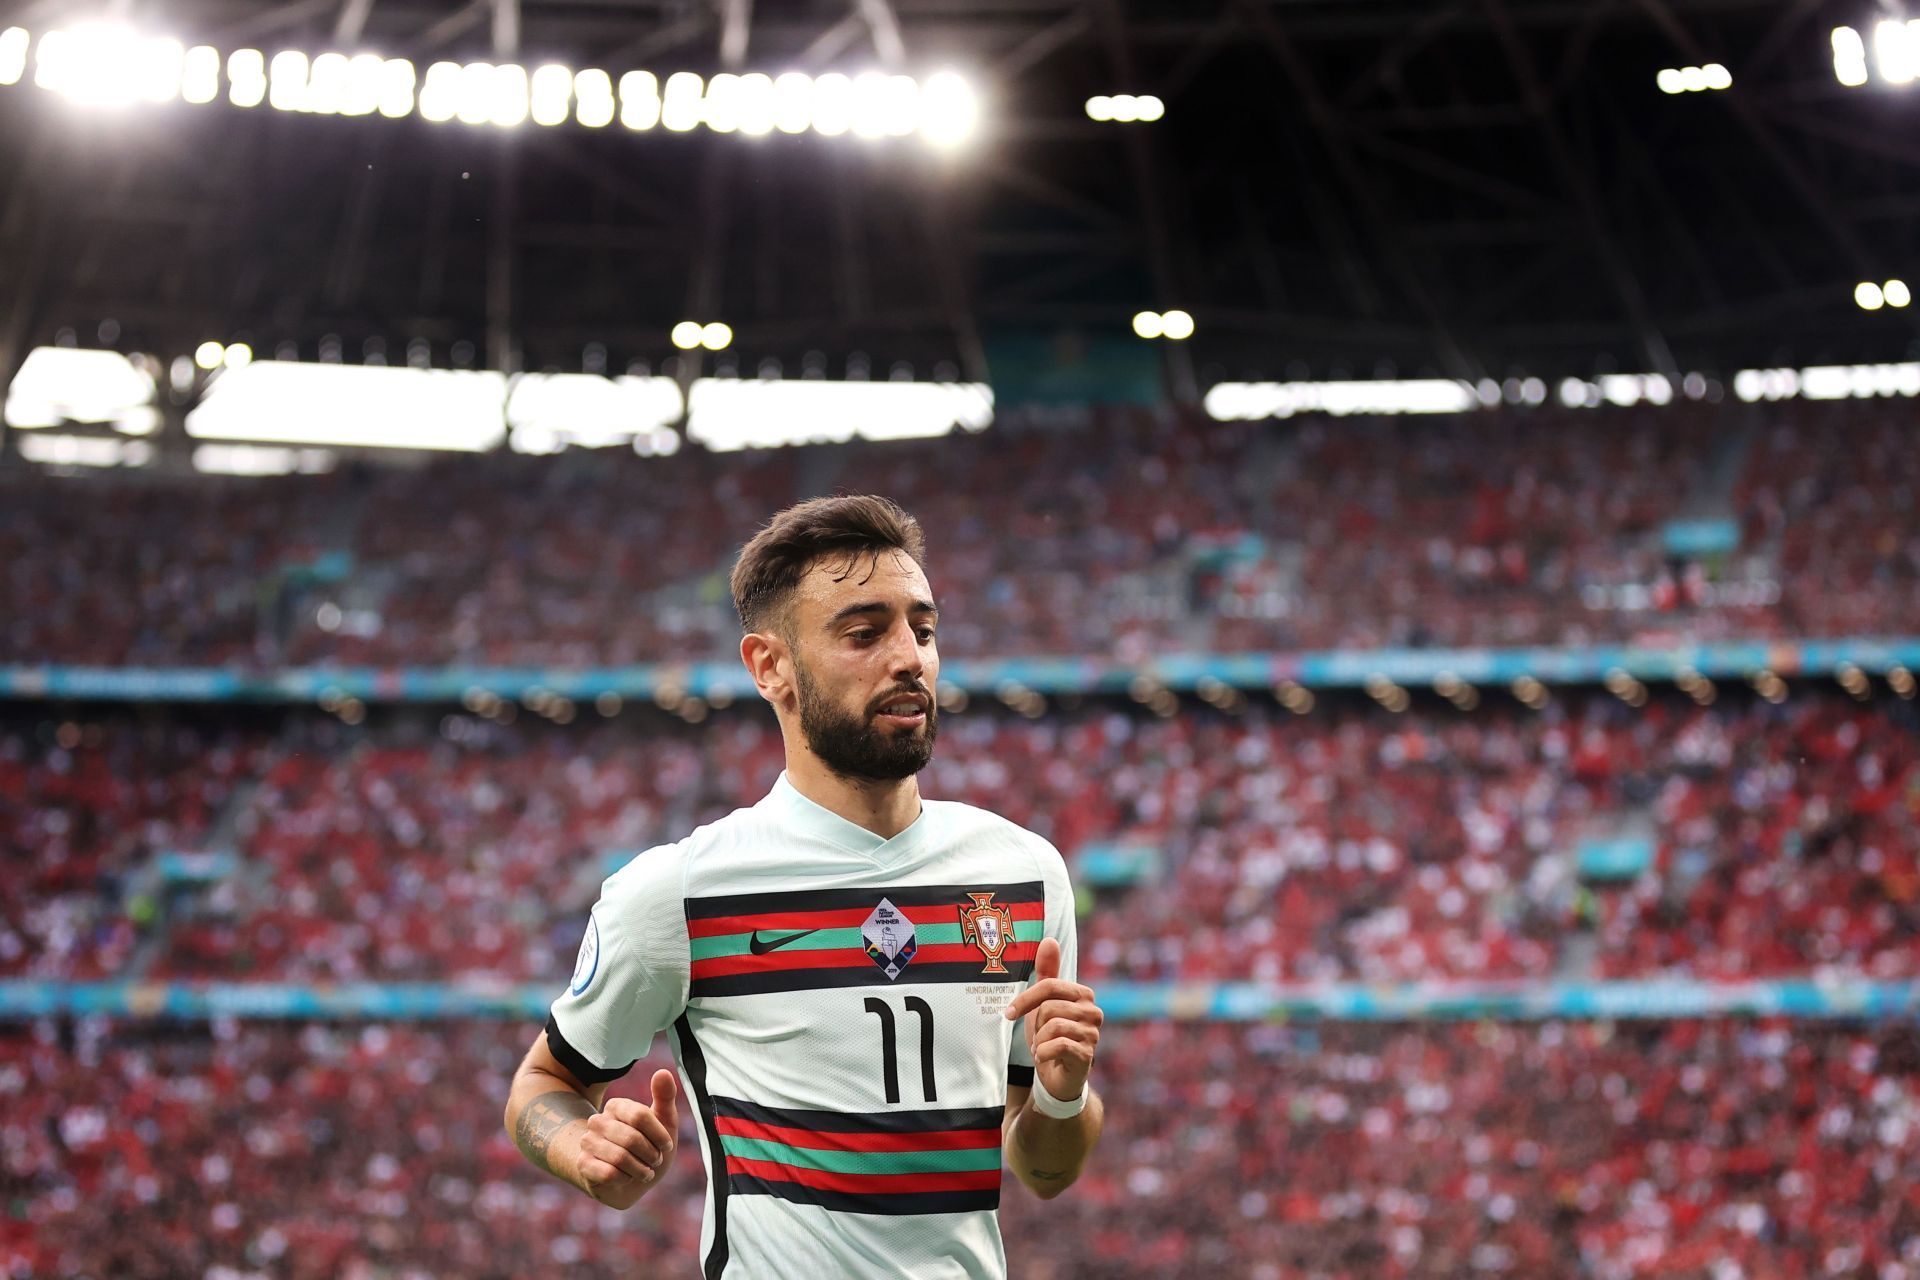 Bruno Fernandes is yet to catch fire for the national team.